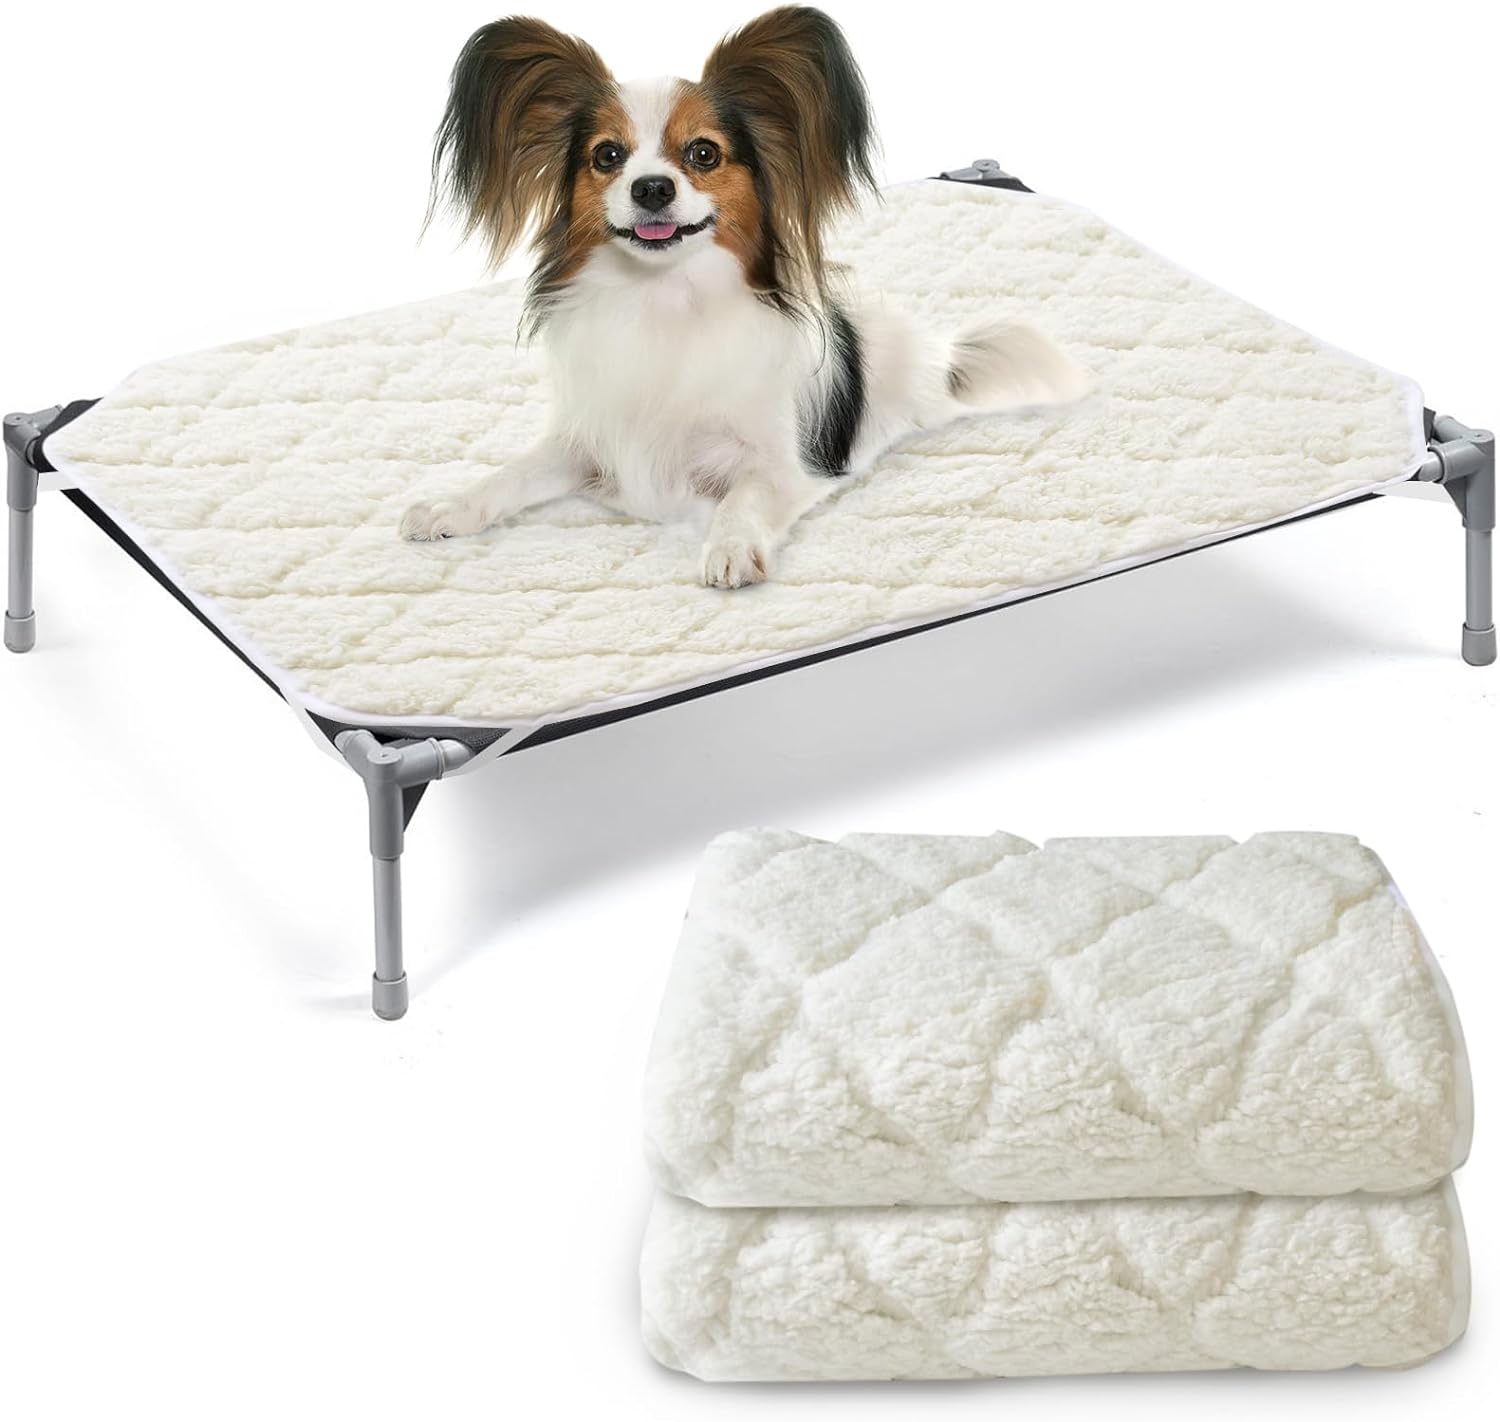 Elevated Dog Bed Pad Waterproof - 2 Pack, Soft Plush Dog Pet Pad for Dog Cot Bed, Machine Washable Dog/Cat Beds Pad with Corner Straps - Biloban Online Store